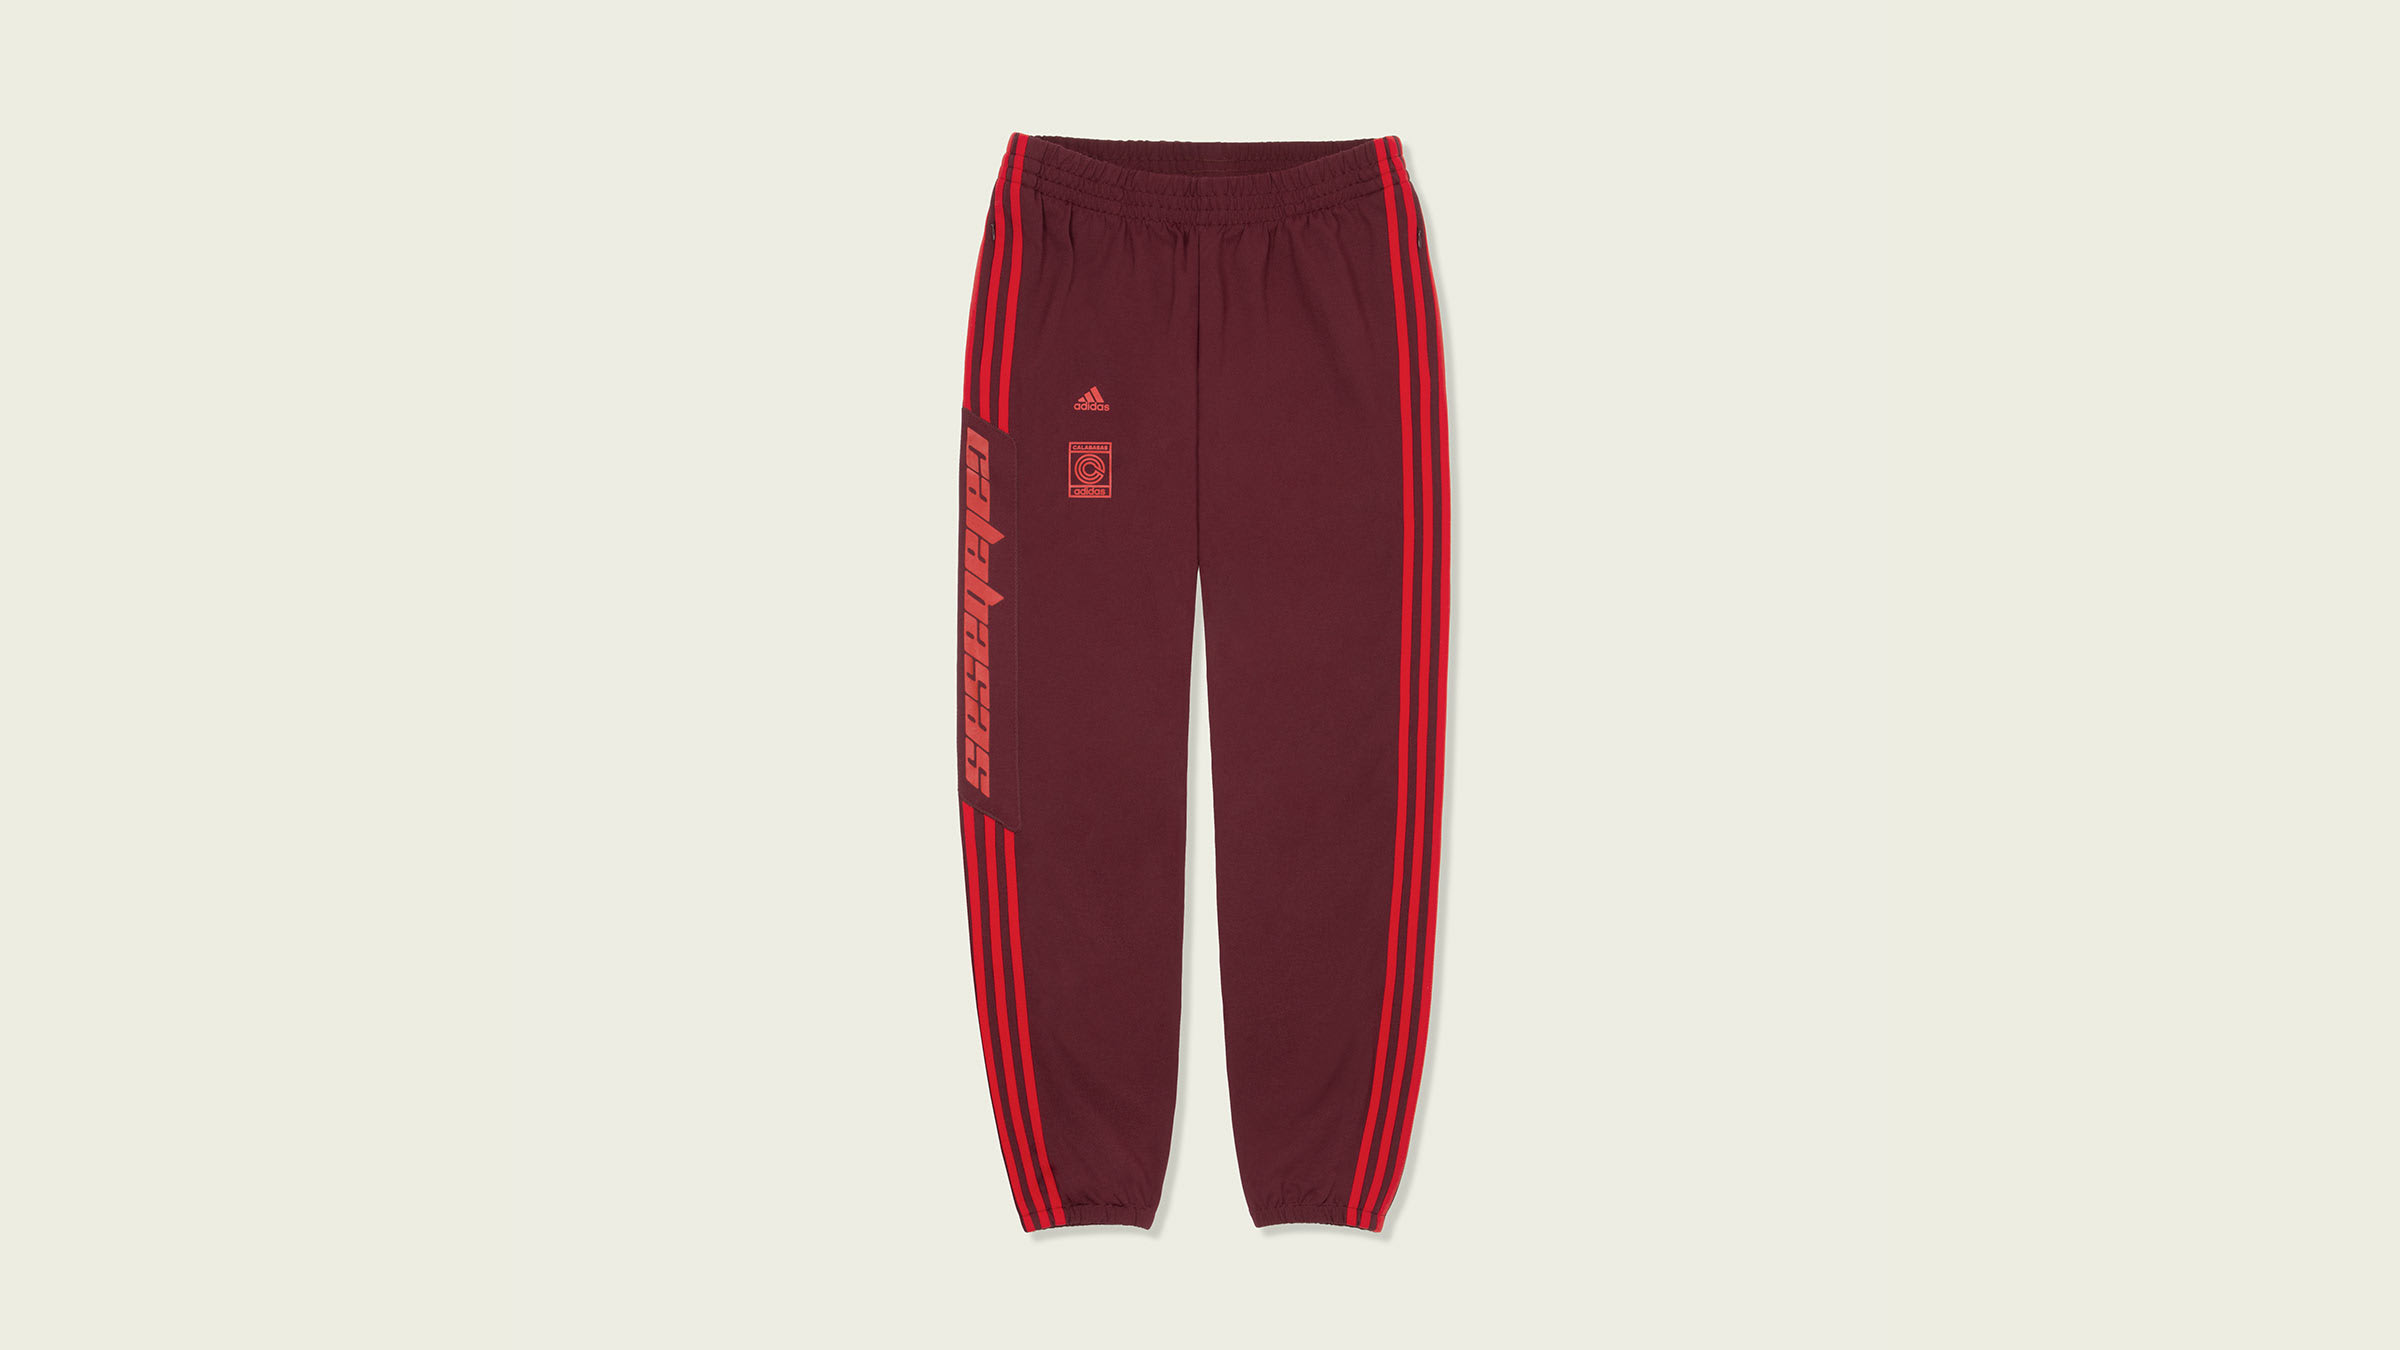 Adidas Yeezy Calabasas Track Pant (Maroon) | END. Launches